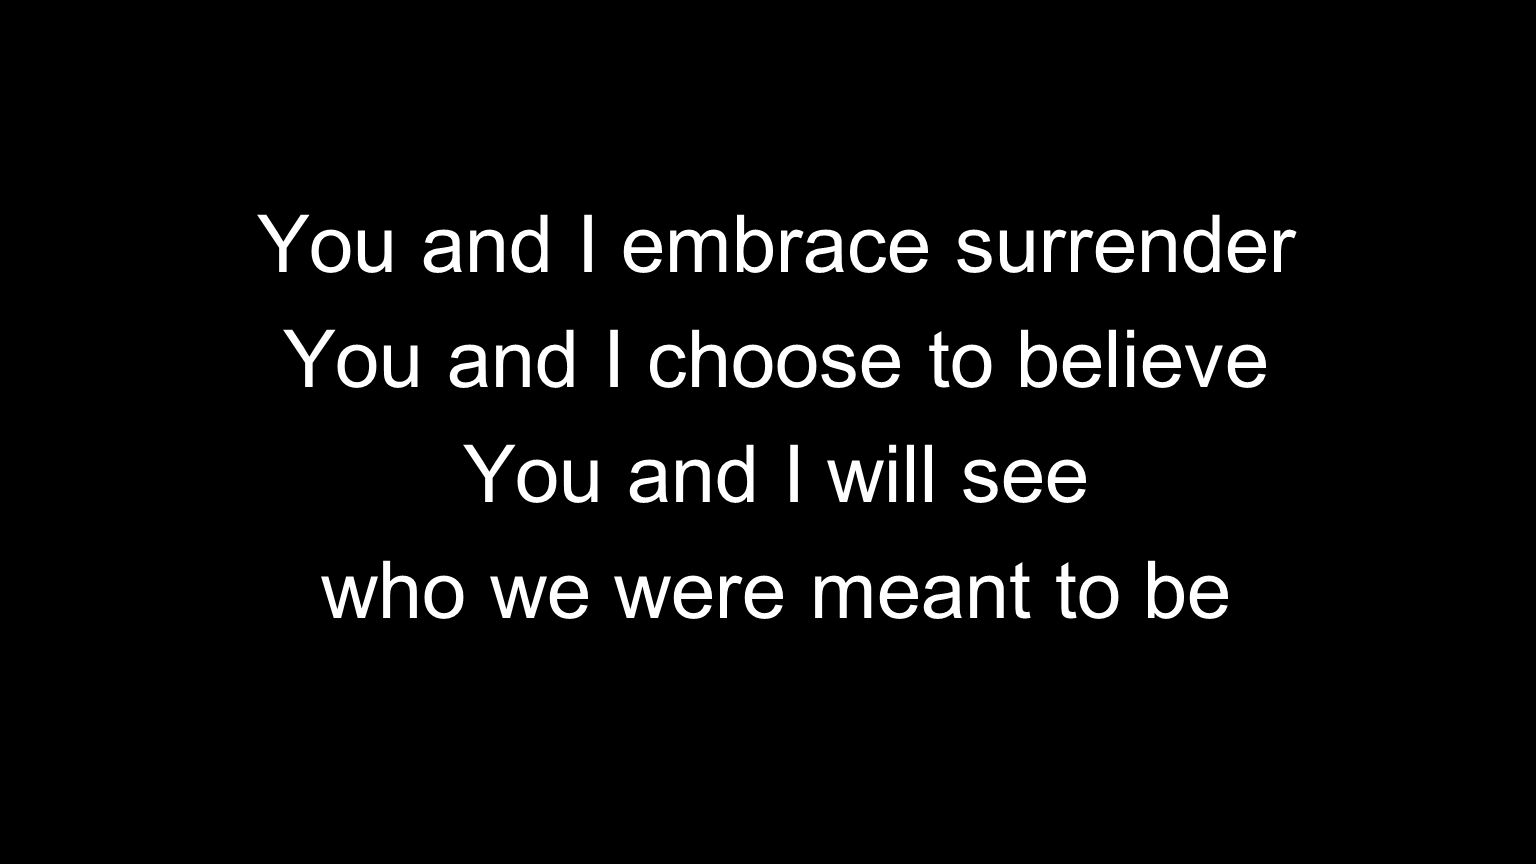 You and I embrace surrender You and I choose to believe You and I will see who we were meant to be